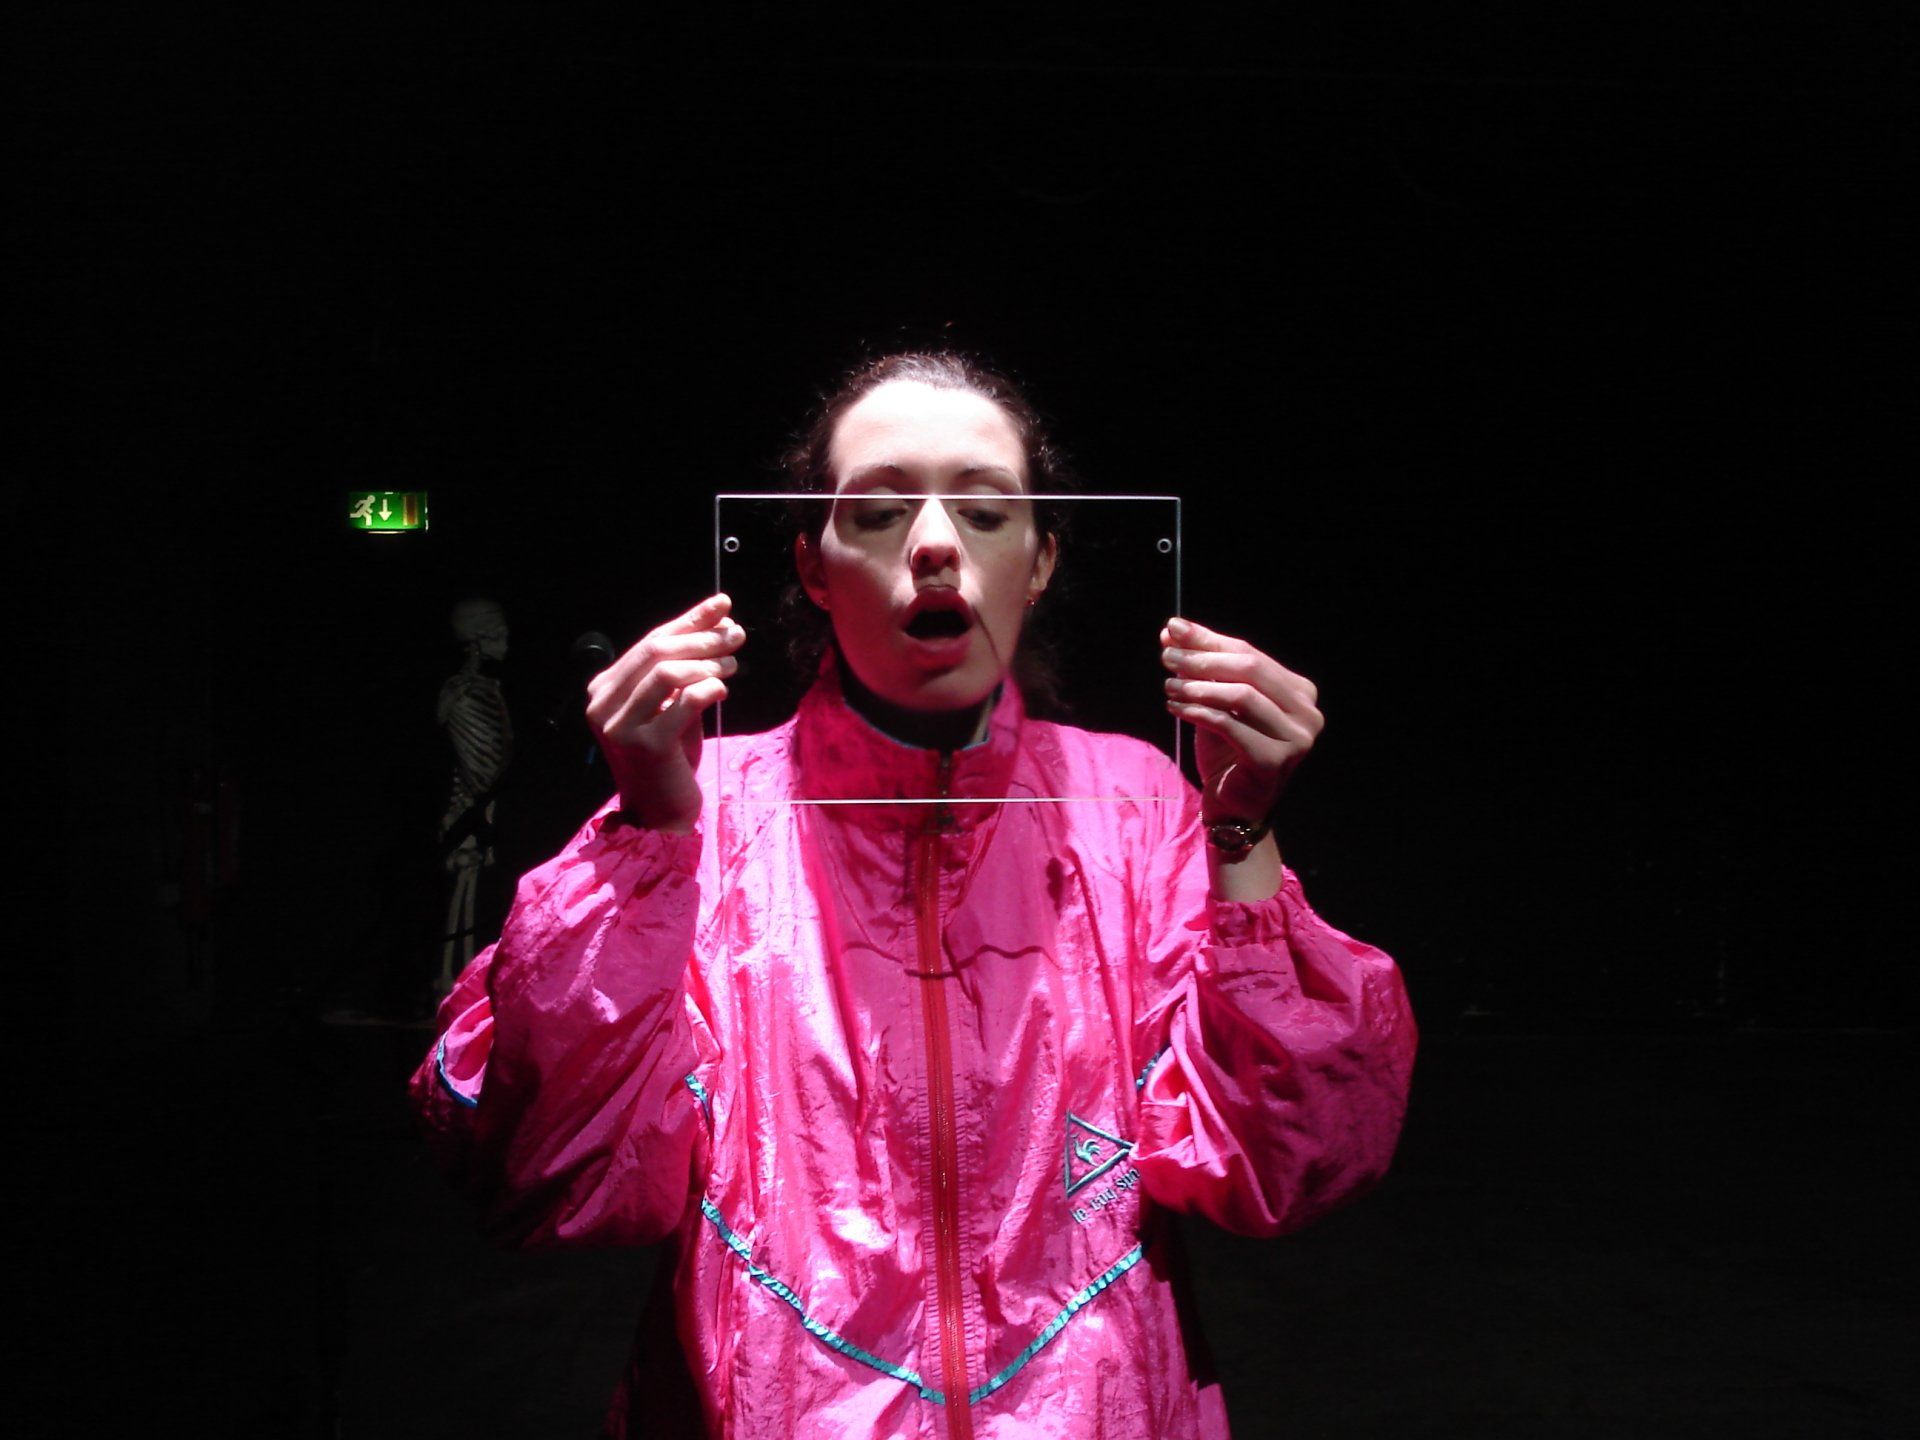 a woman in a pink jacket is holding a piece of glass in front of her face .